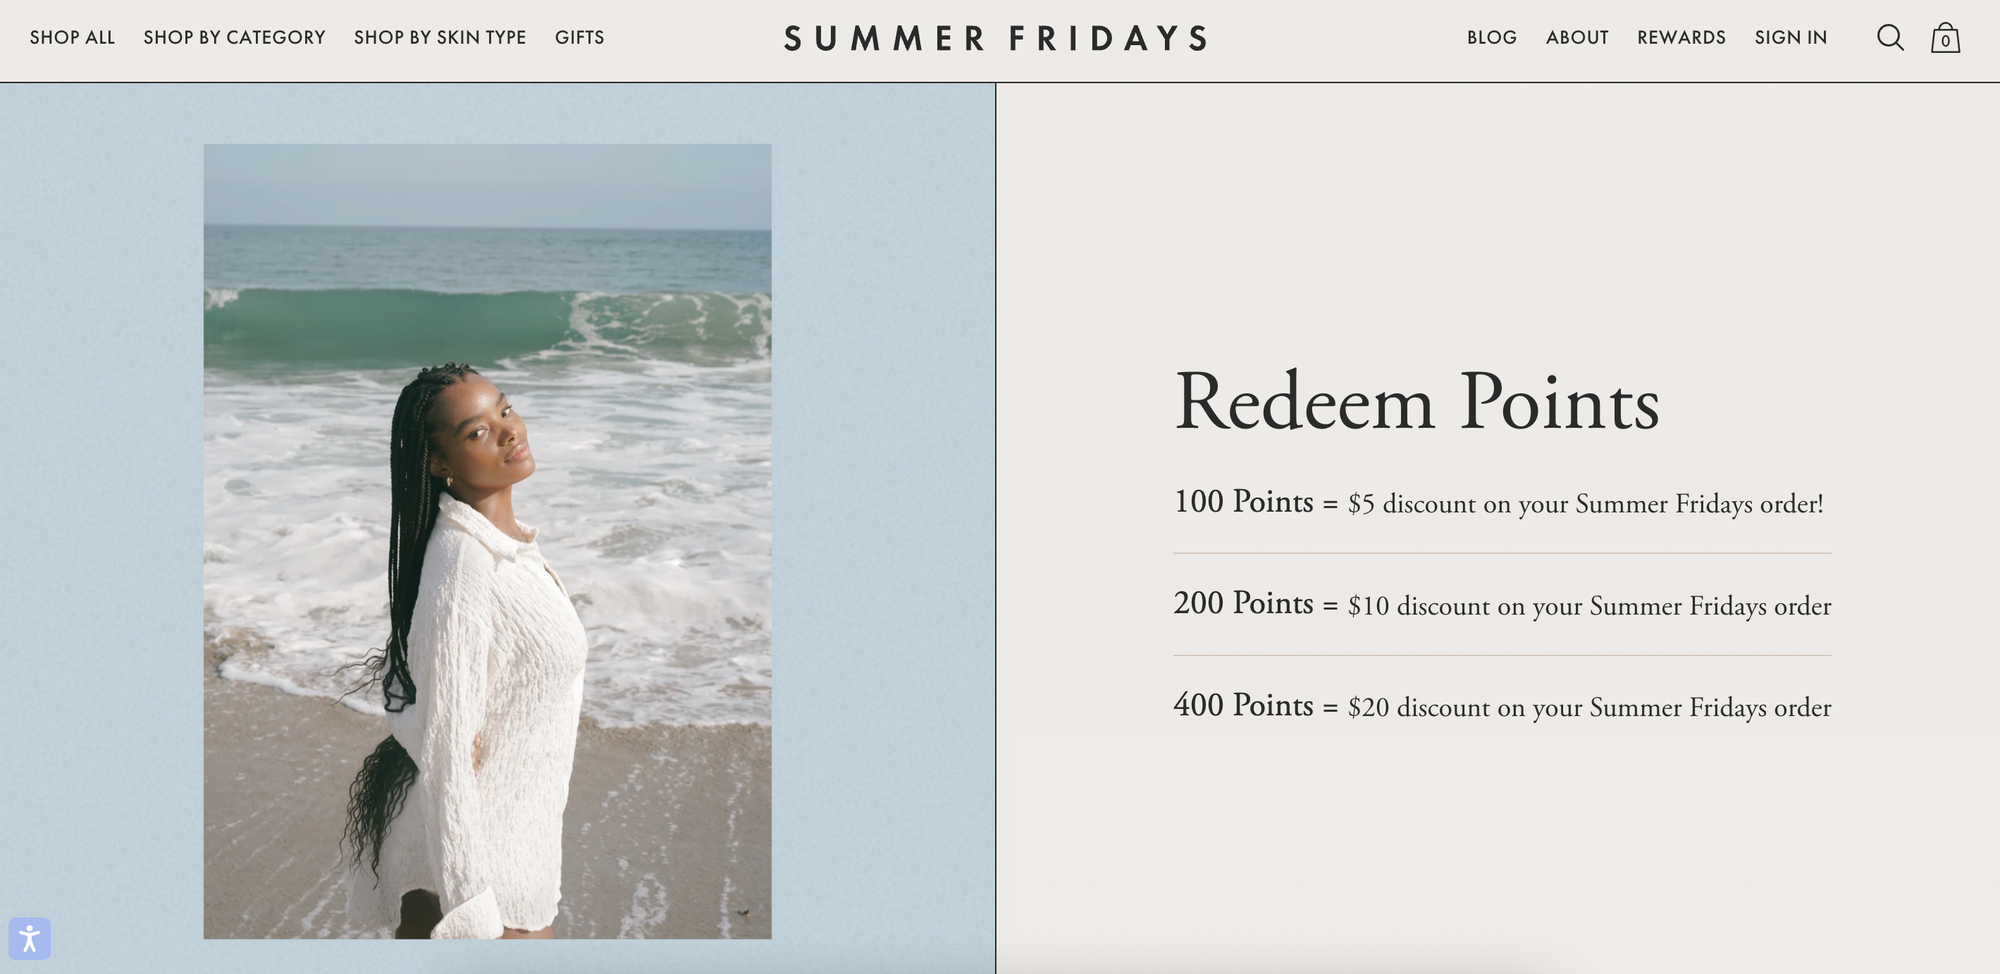 How Do I Explain My Loyalty Program to My Customers? - summer fridays loyalty program with text "redeem points."